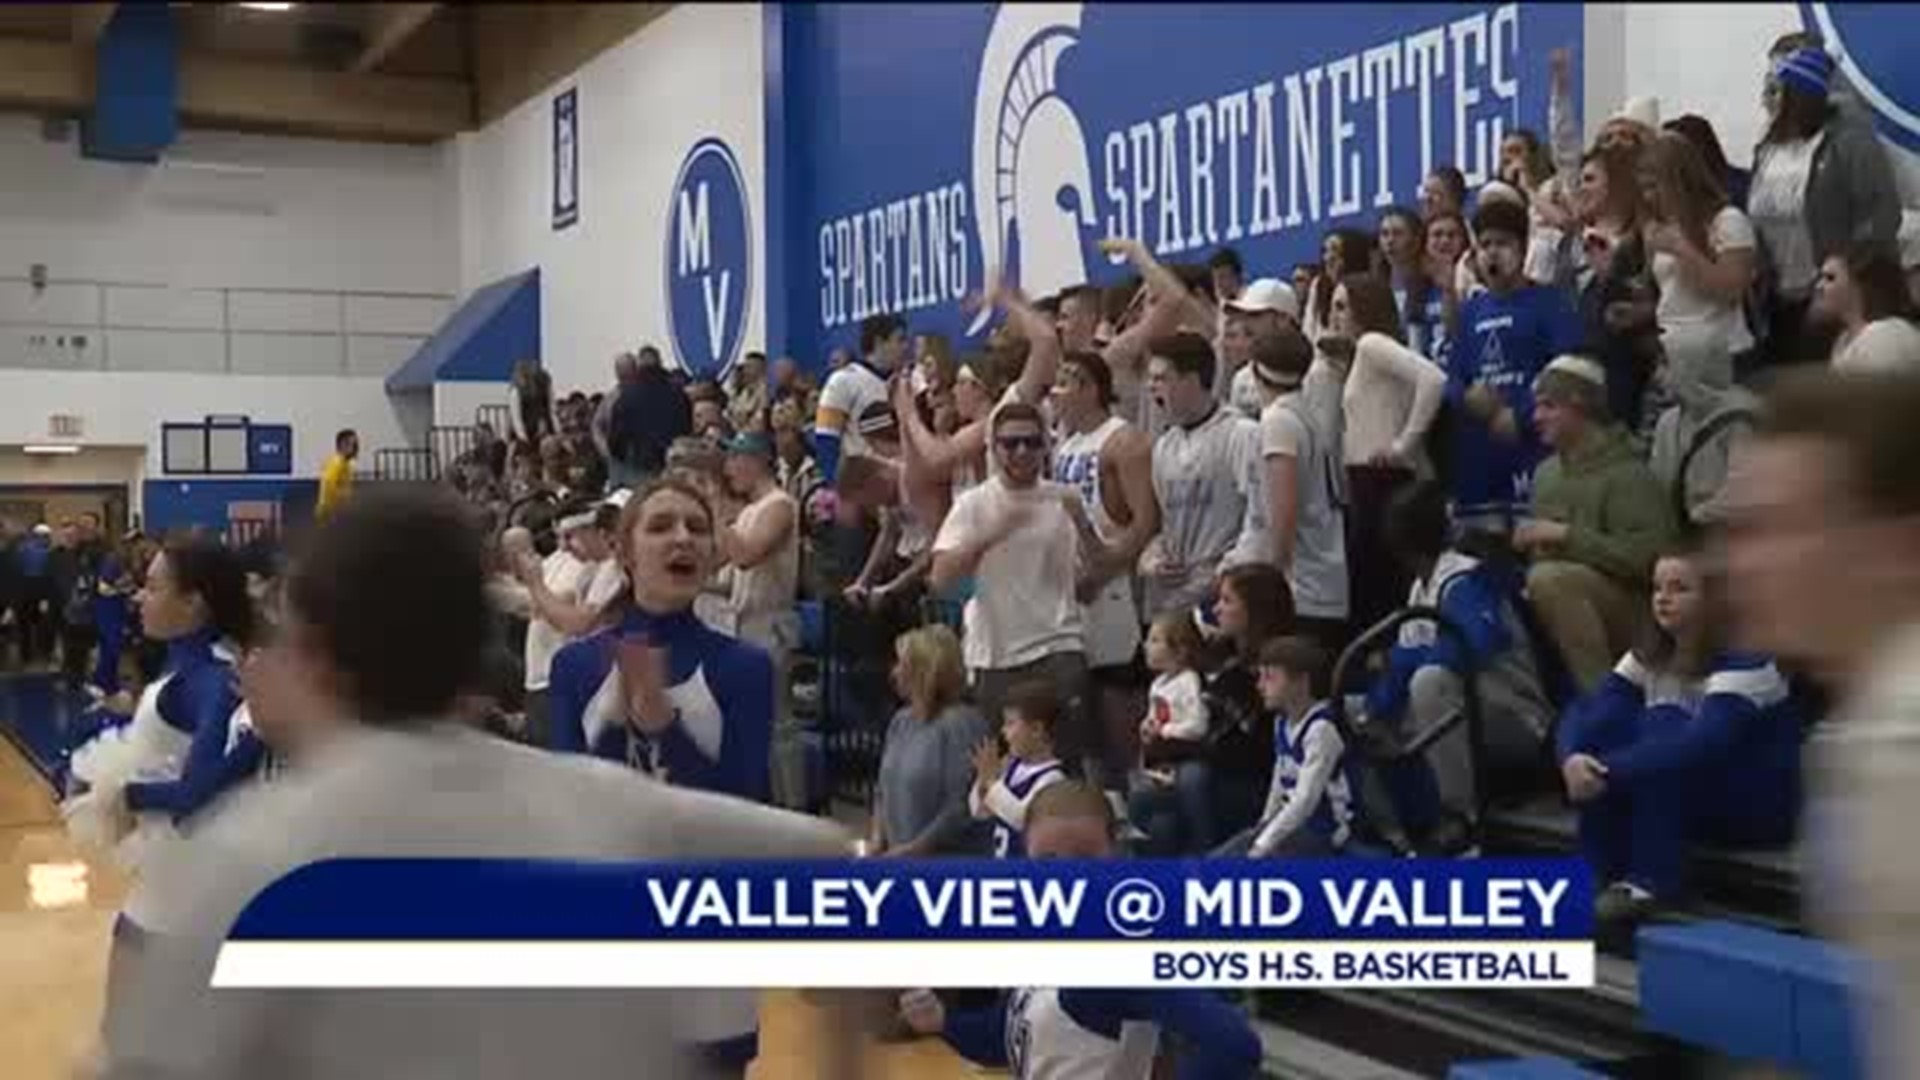 Valley View vs Mid Valley girls/boys basketball